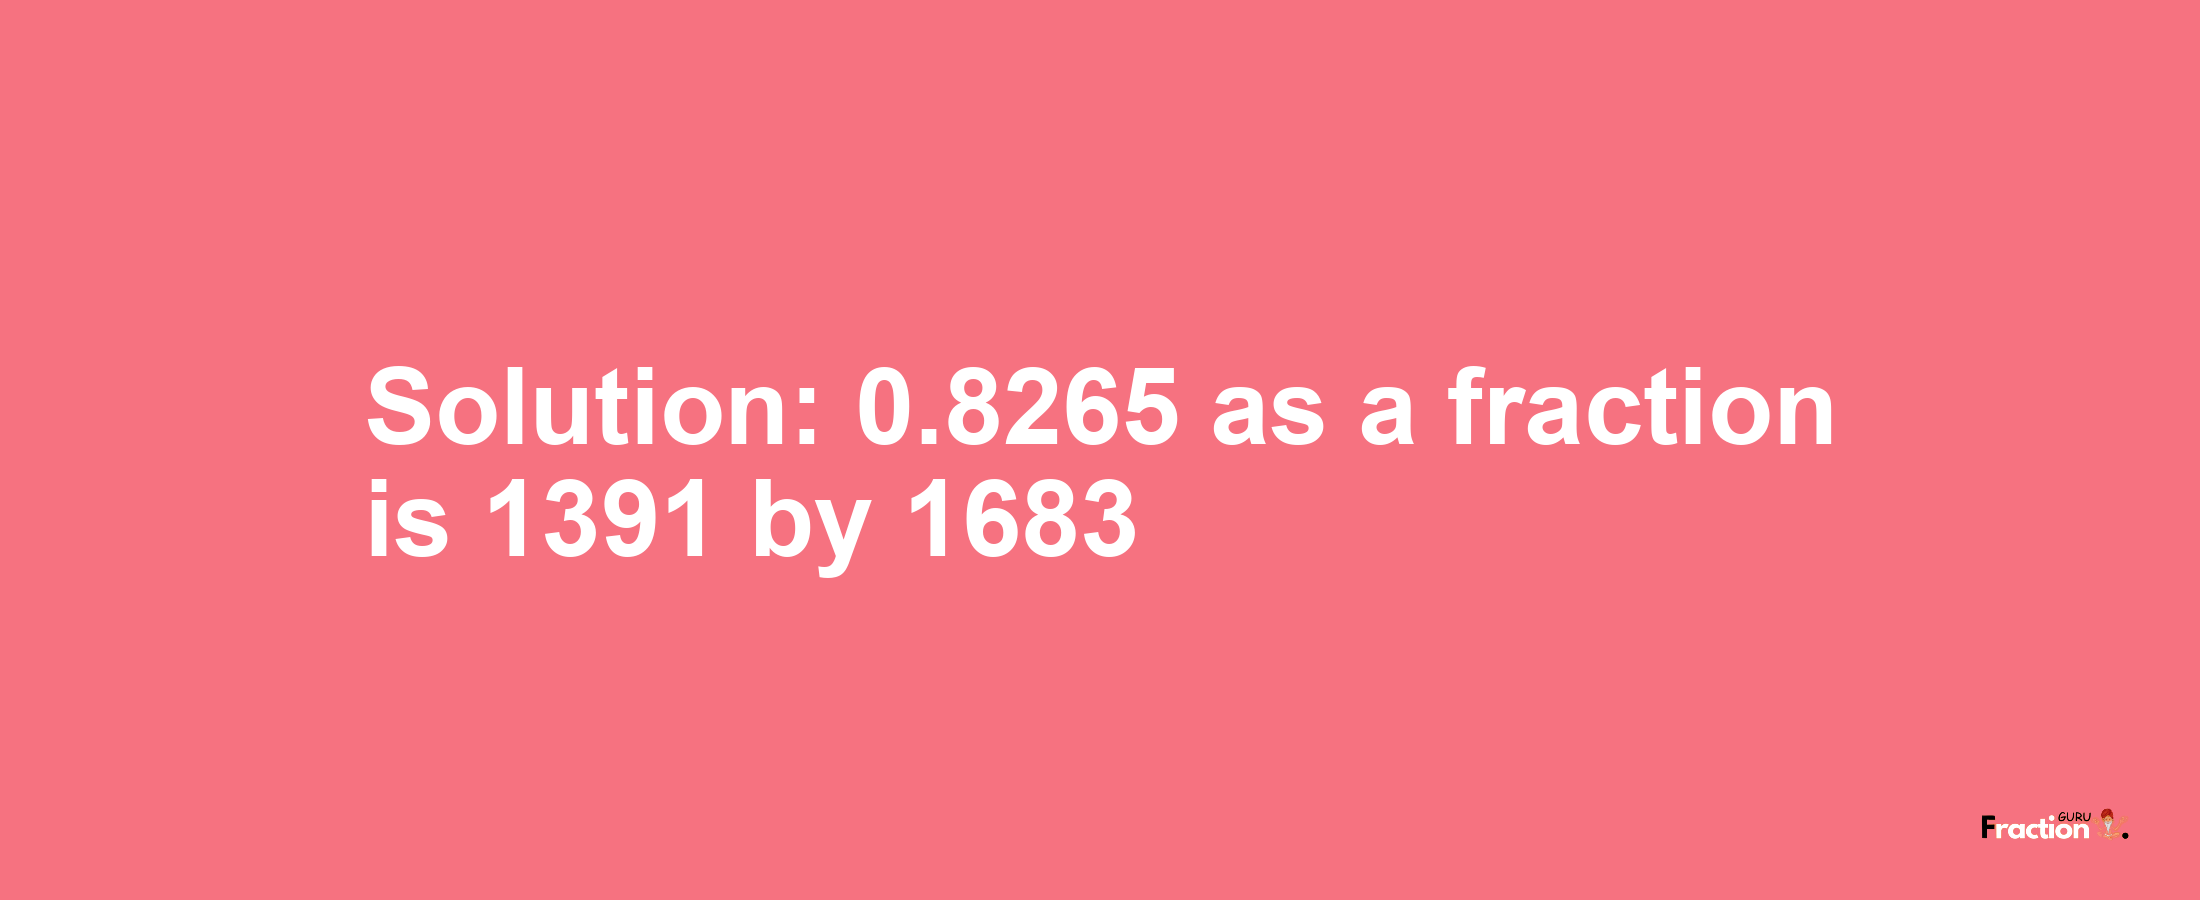 Solution:0.8265 as a fraction is 1391/1683